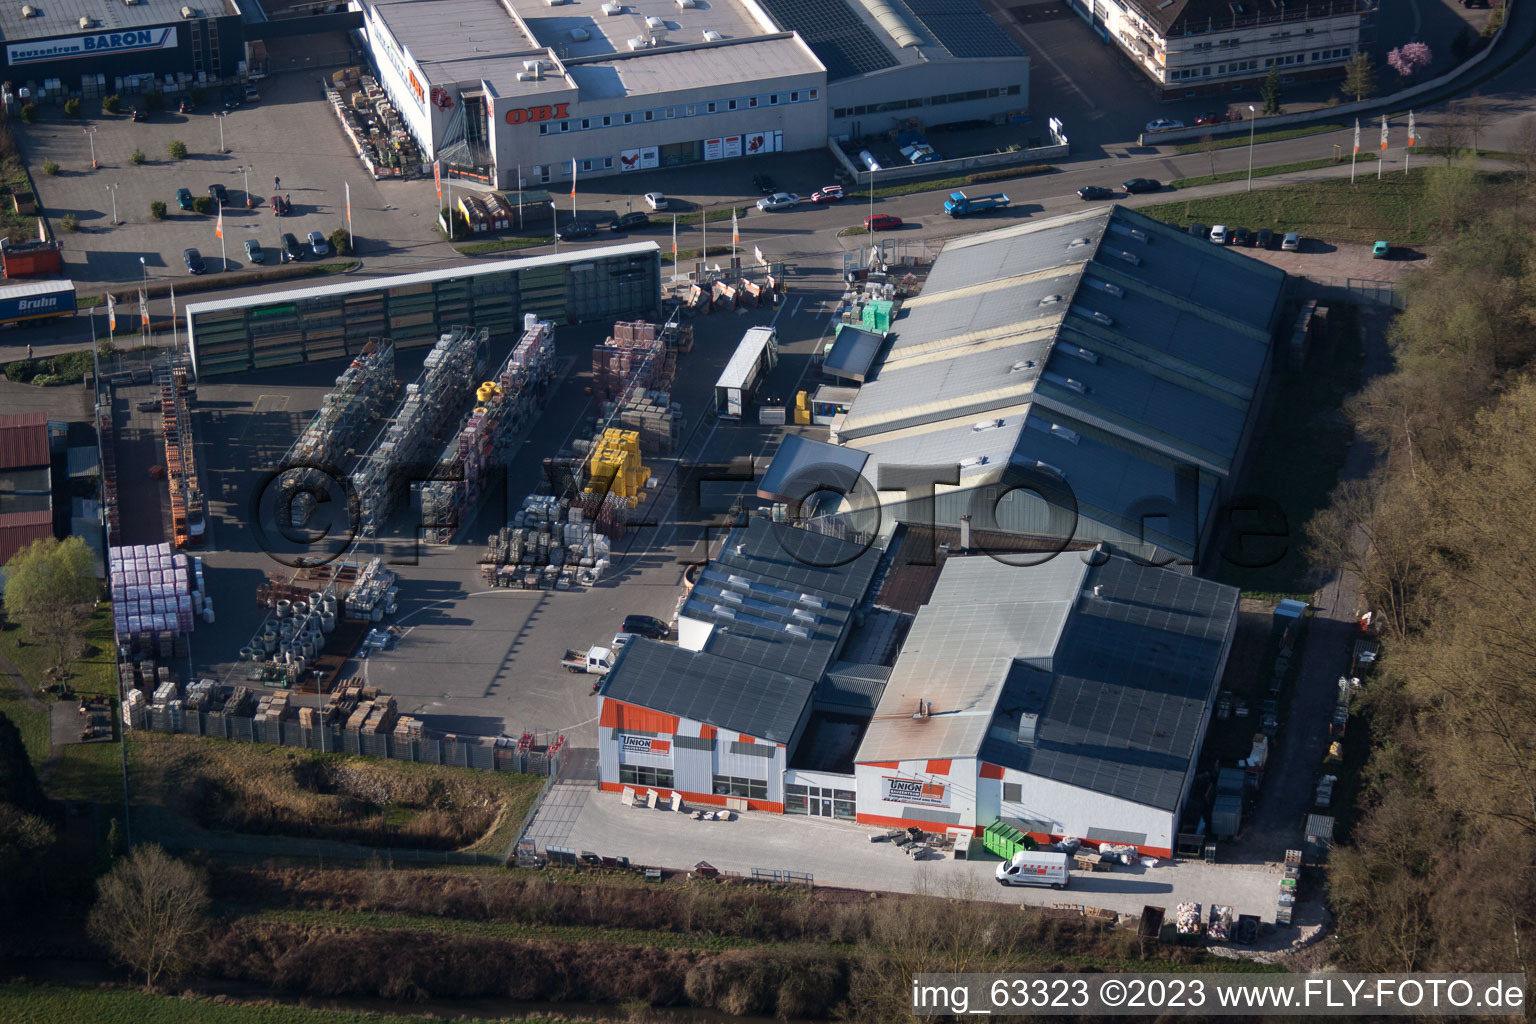 Horst industrial area in the district Minderslachen in Kandel in the state Rhineland-Palatinate, Germany seen from above